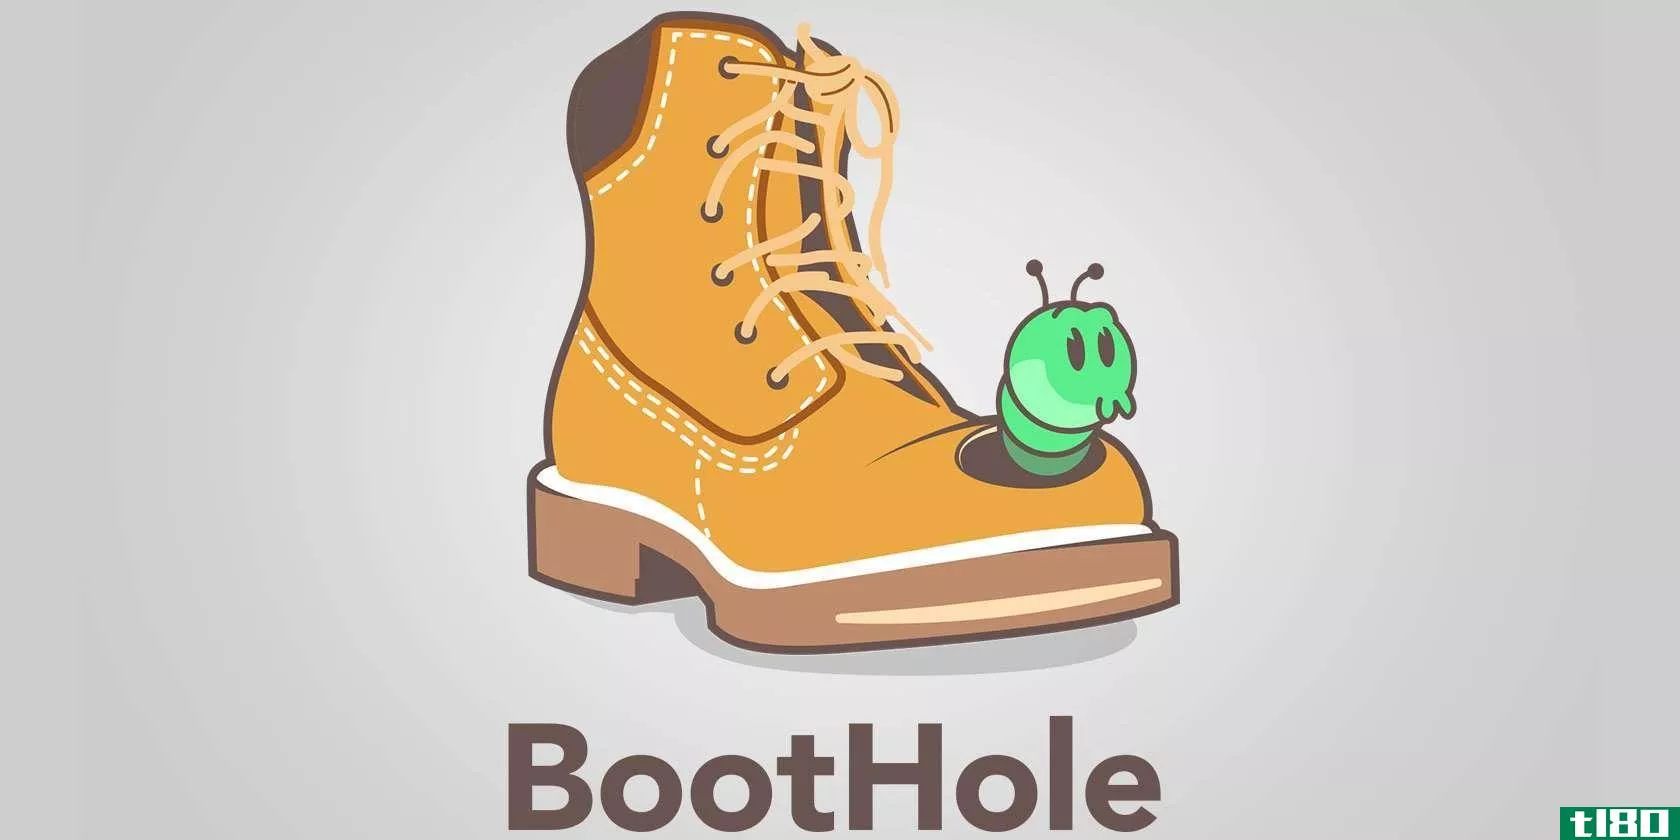 The official graphic for BootHole